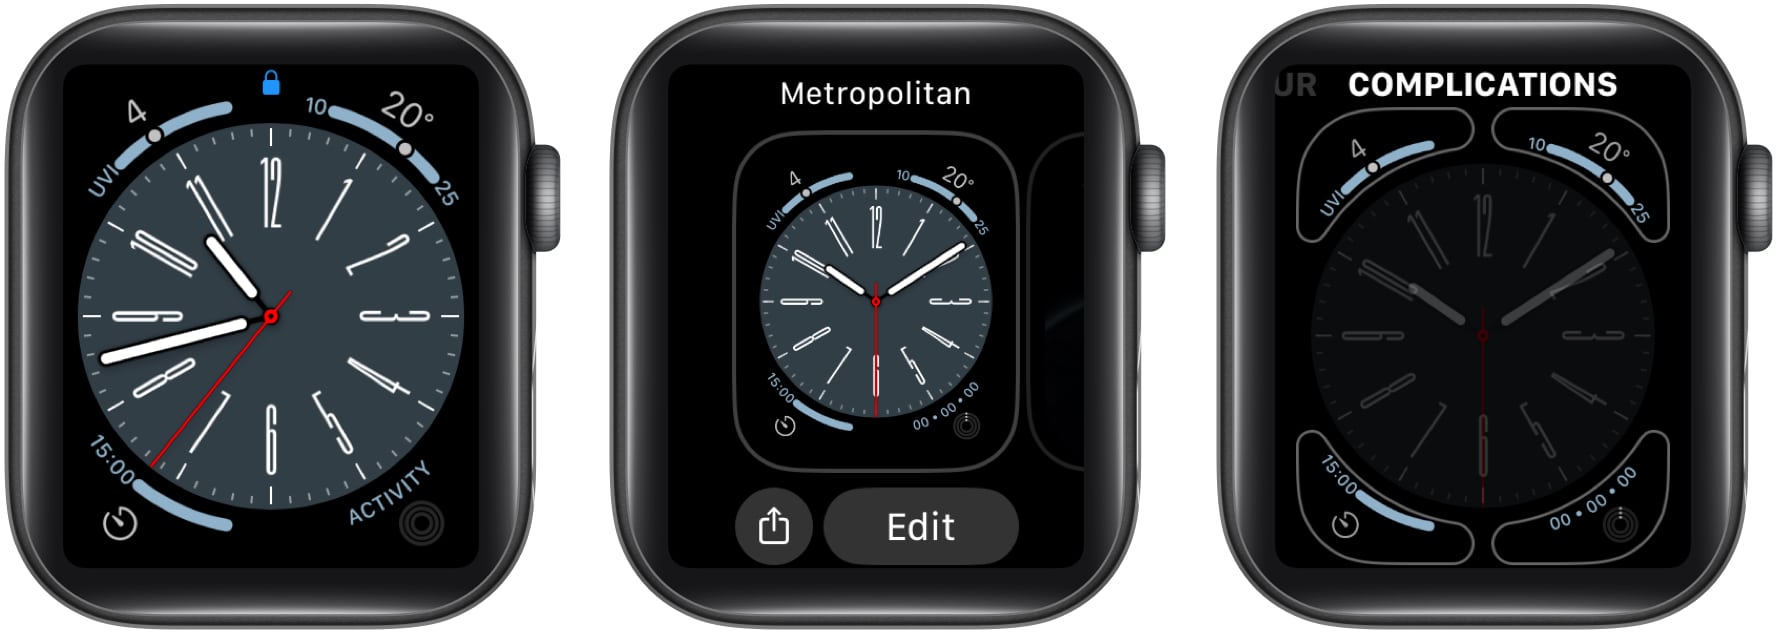 Tap and hold watch face, Tap Edit, Swipe to Complications